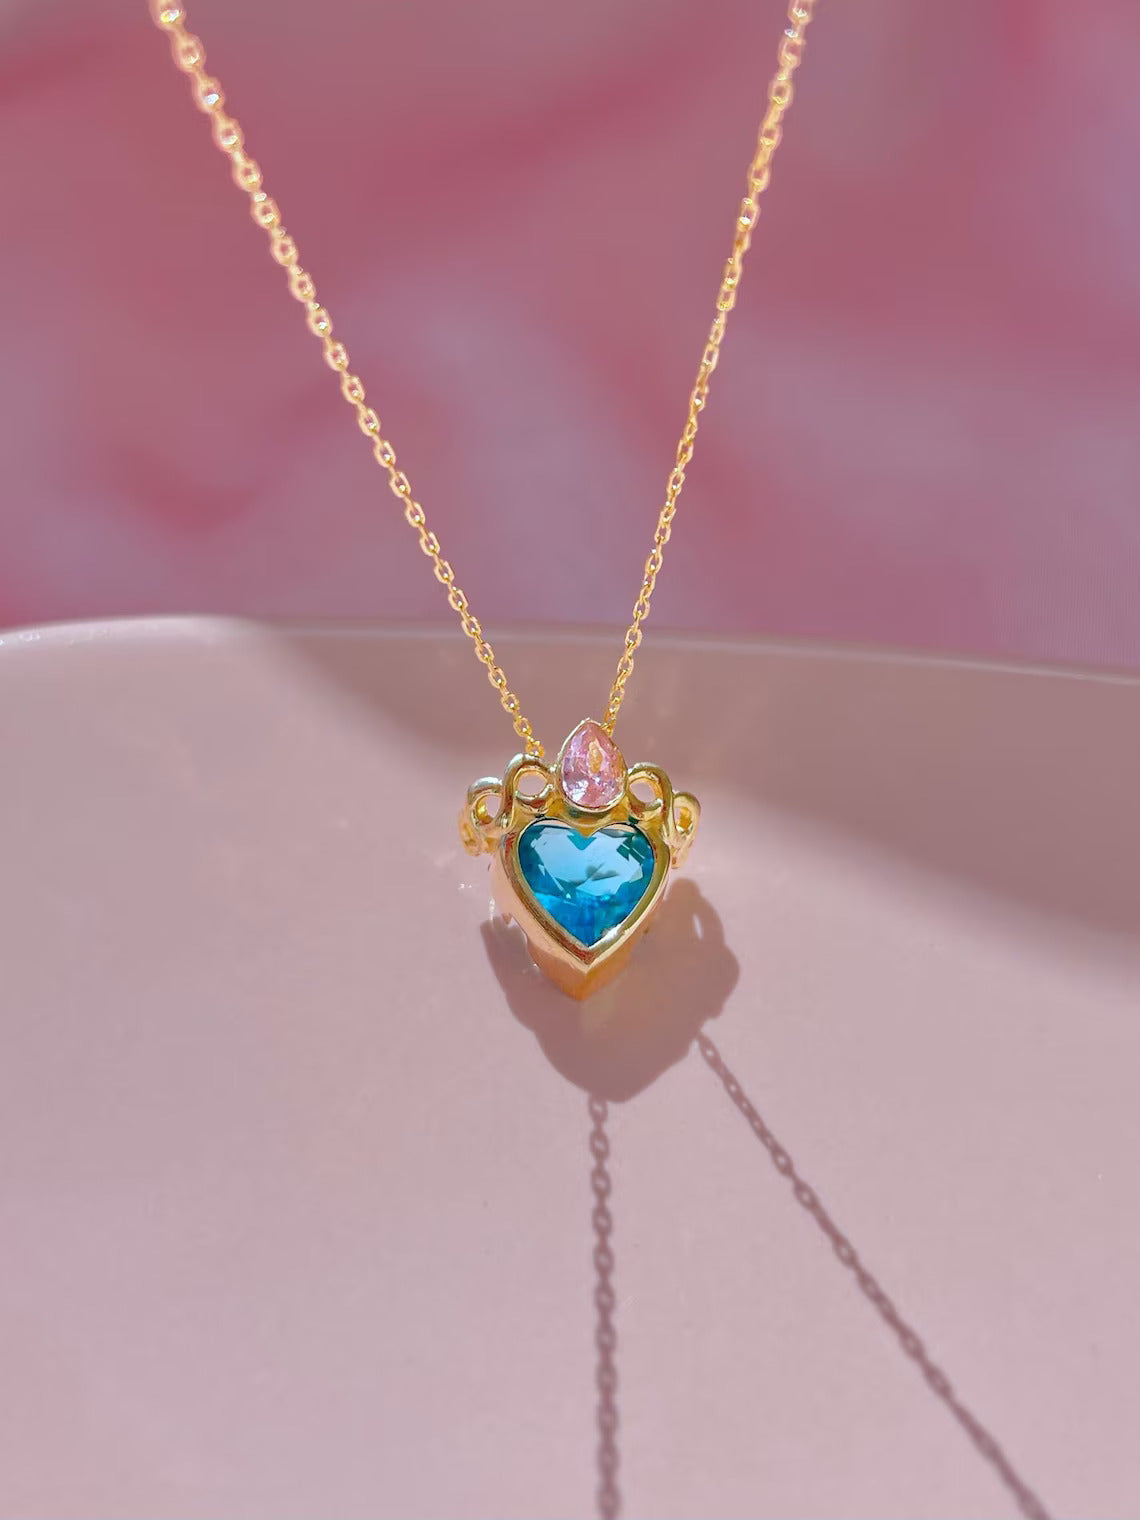 Swan Lake Princess Odette Necklace Pink Stone Swan Necklace Tiara Silver Heart Necklace